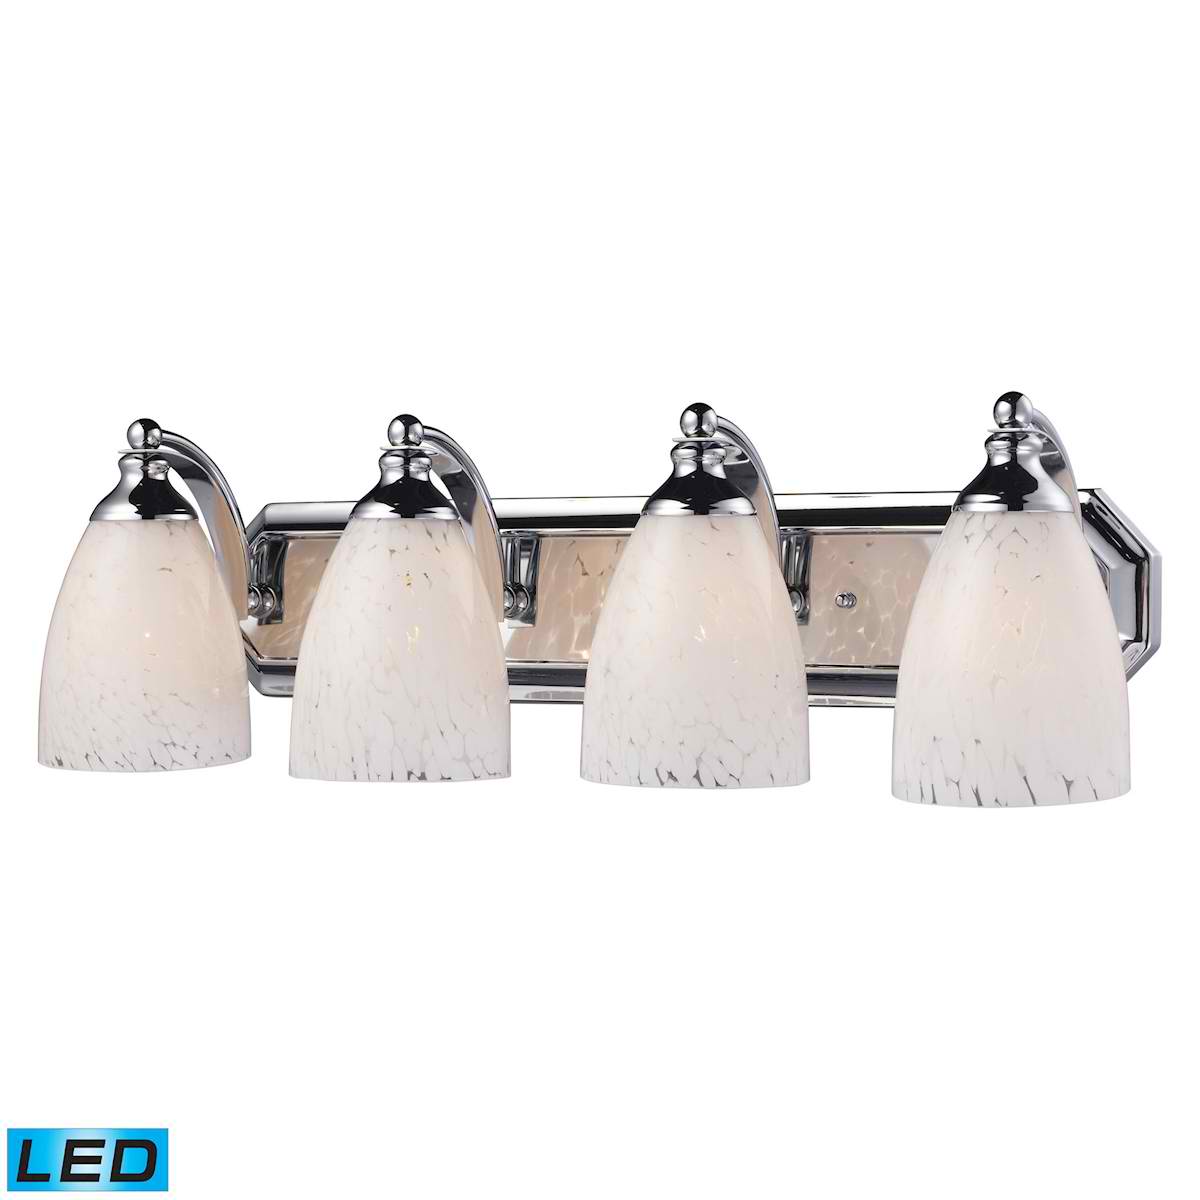 4 Light Vanity in Polished Chrome and Snow White Glass - LED, 800 Lumens (3200 Lumens Total) with Full Scale